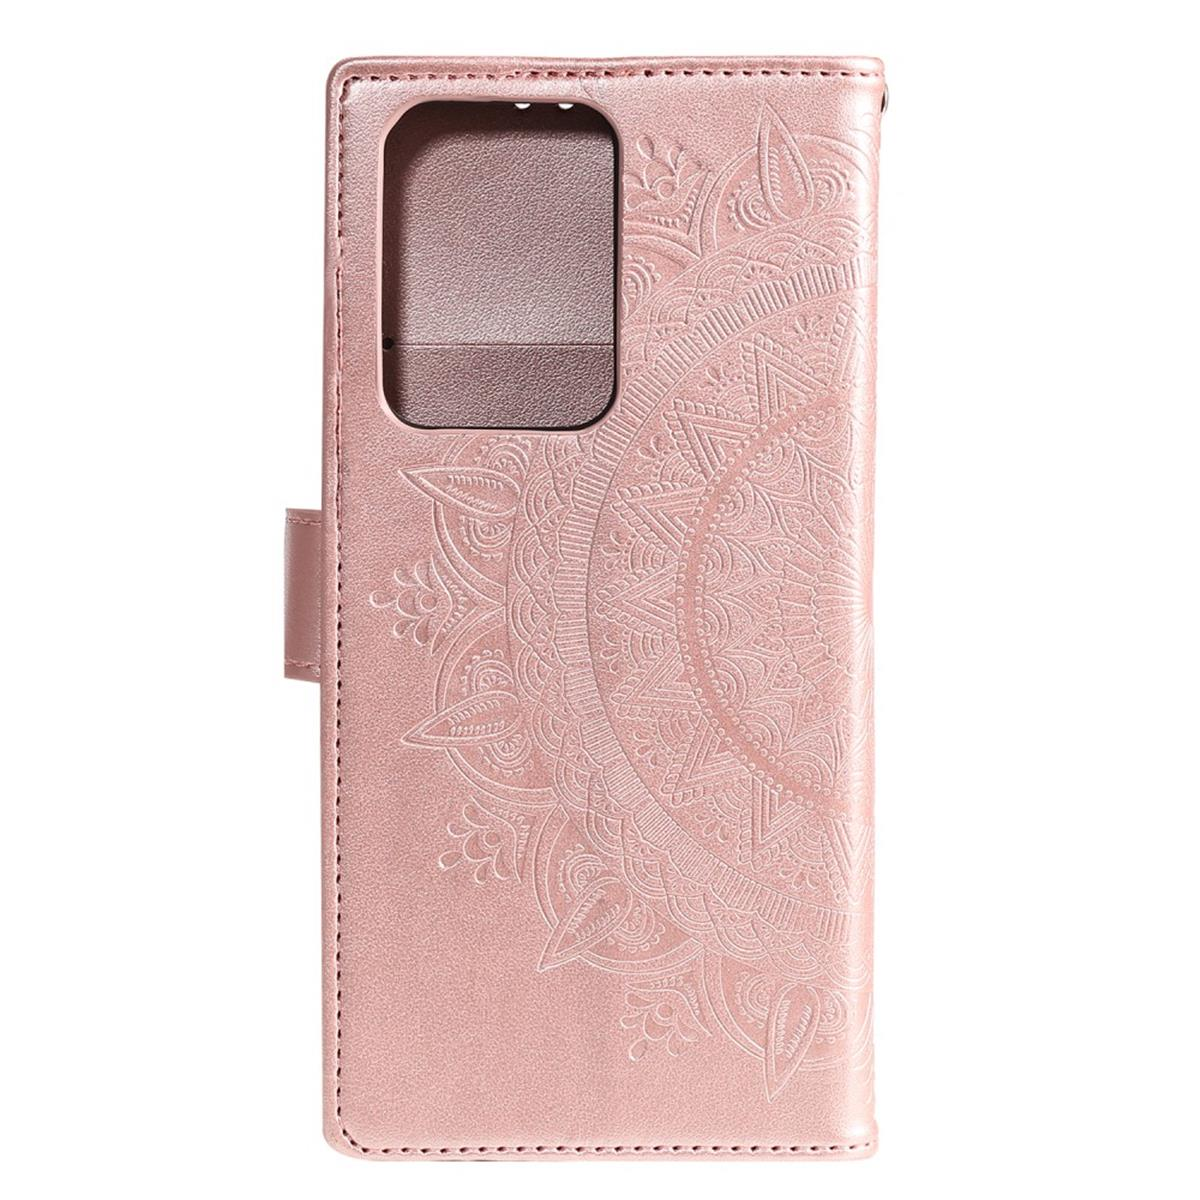 COVERKINGZ Ultra, mit S20 Samsung, Mandala Muster, Bookcover, Galaxy Roségold Klapphülle